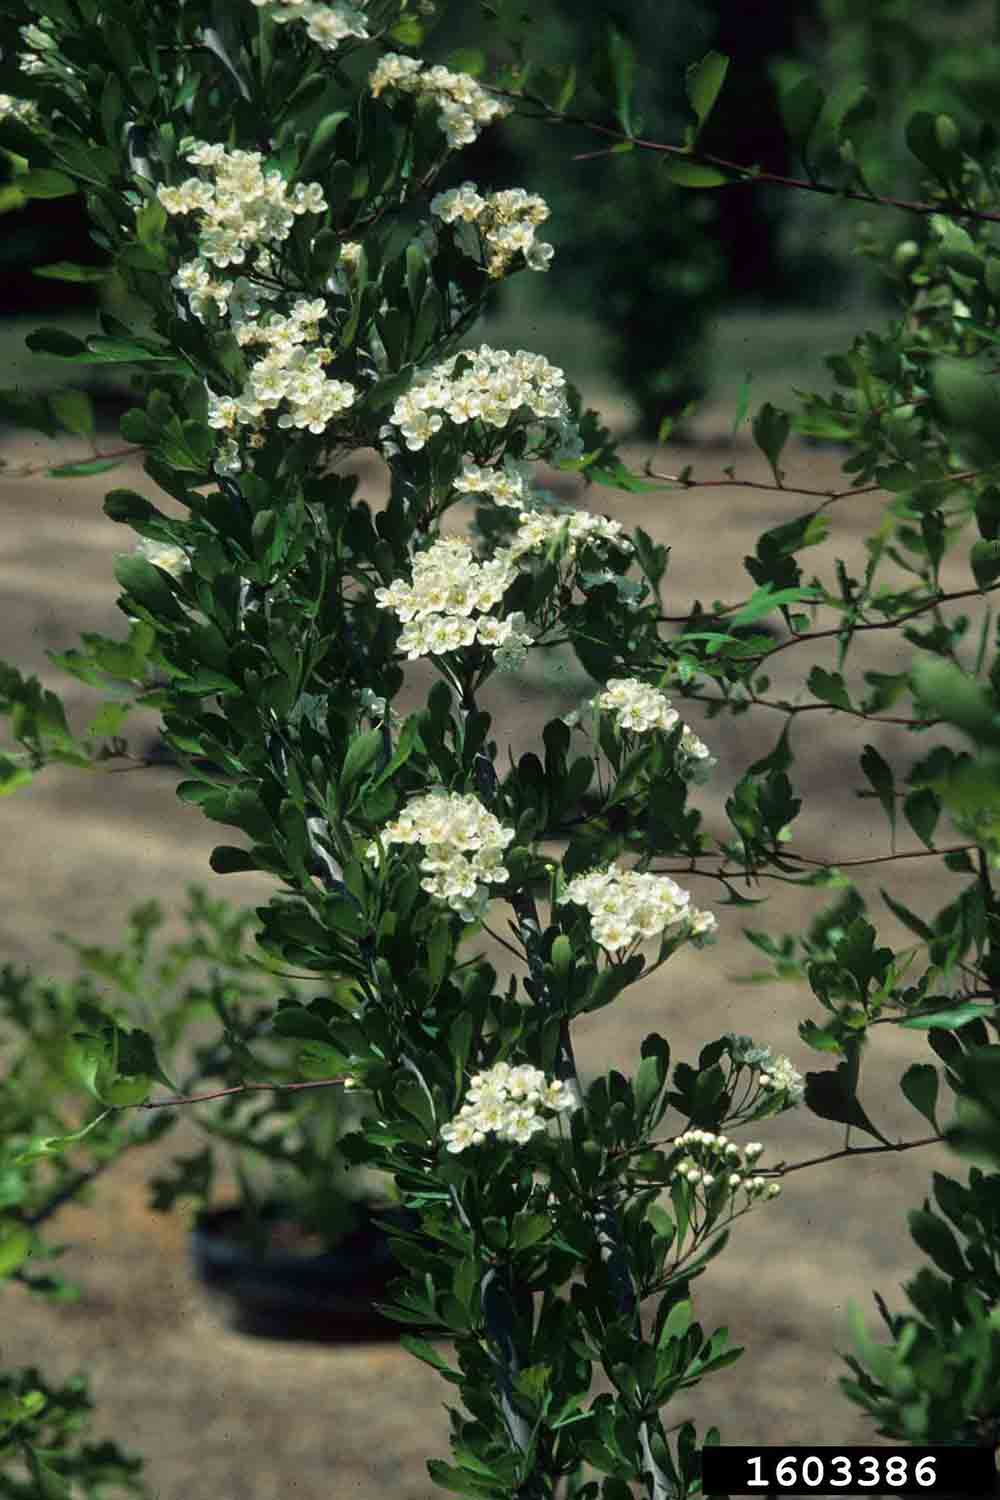 Littlehip or pasture hawthorn flowers and foliage